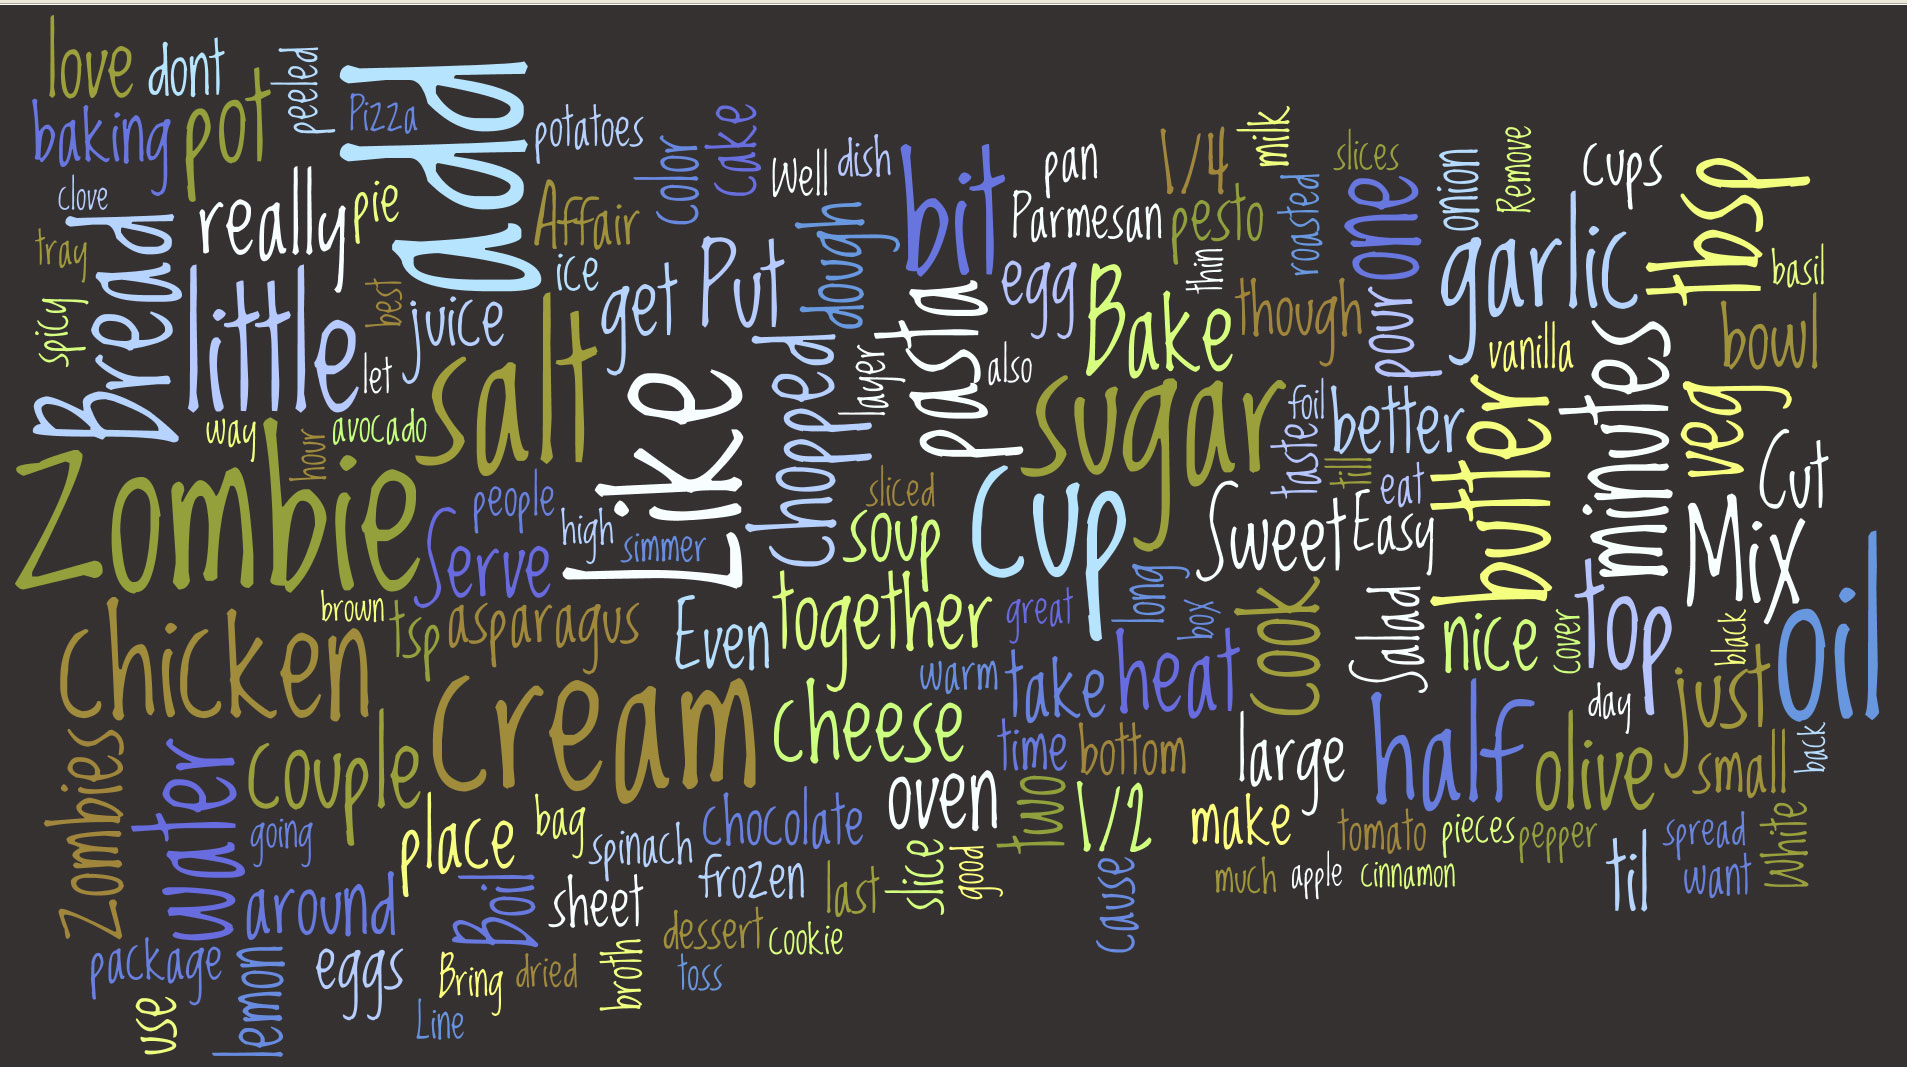 eating-with-zombies-wordle-2